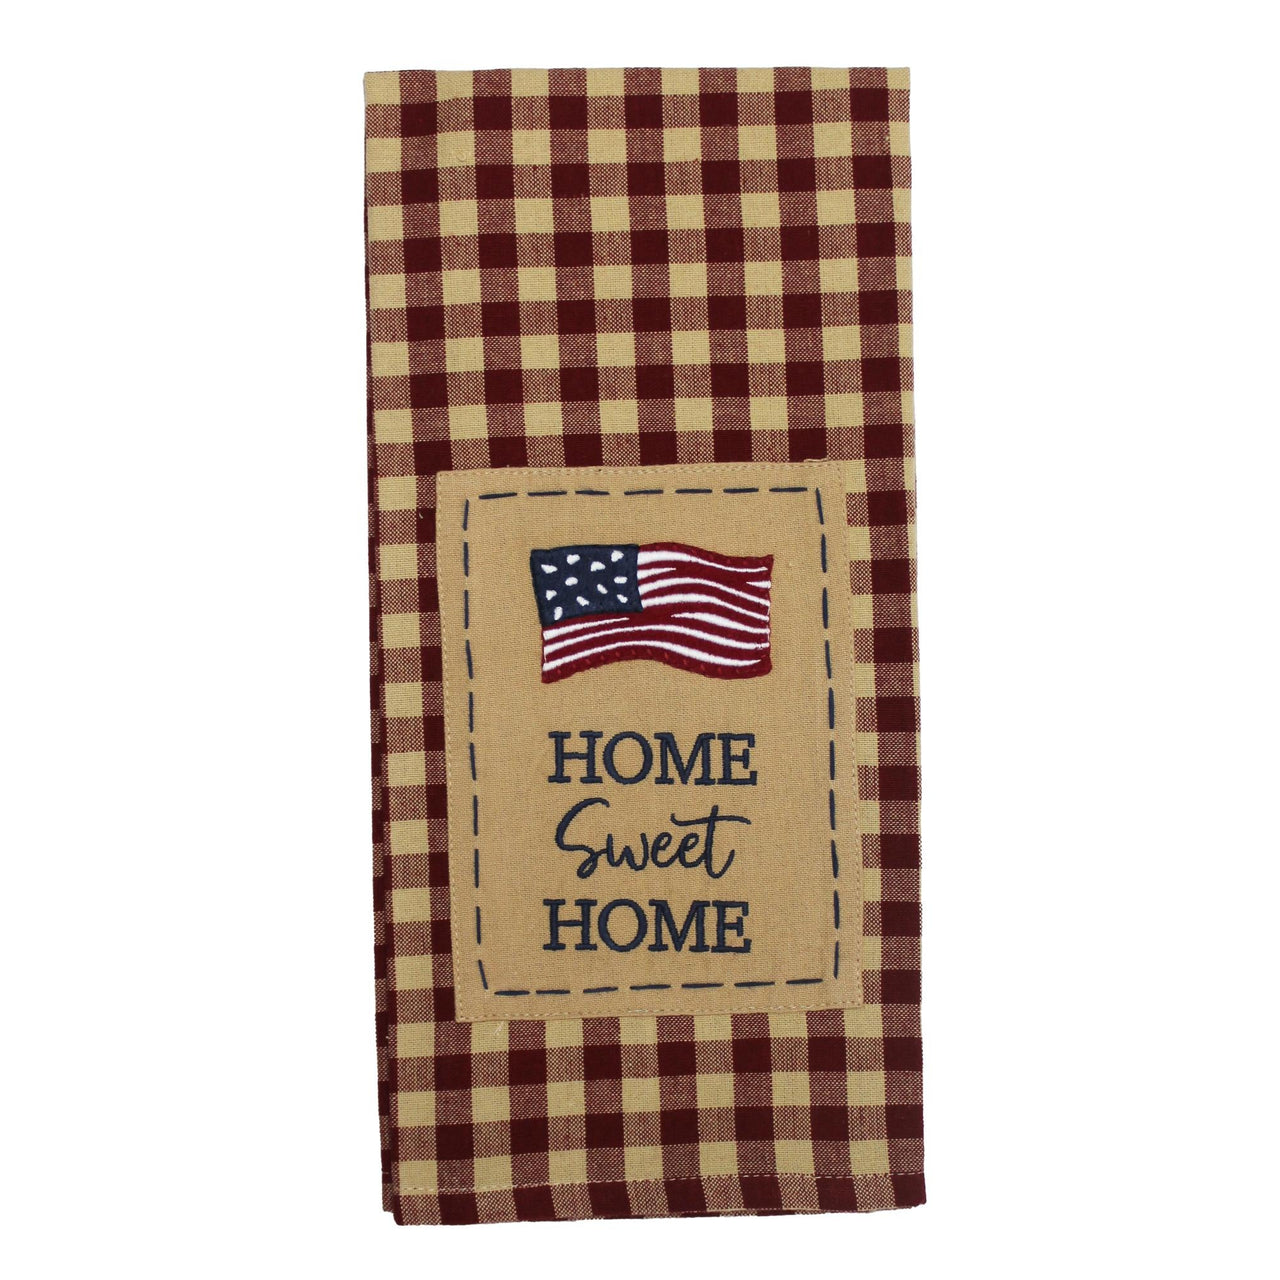 Home Sweet Home Flag Towel - Interiors by Elizabeth